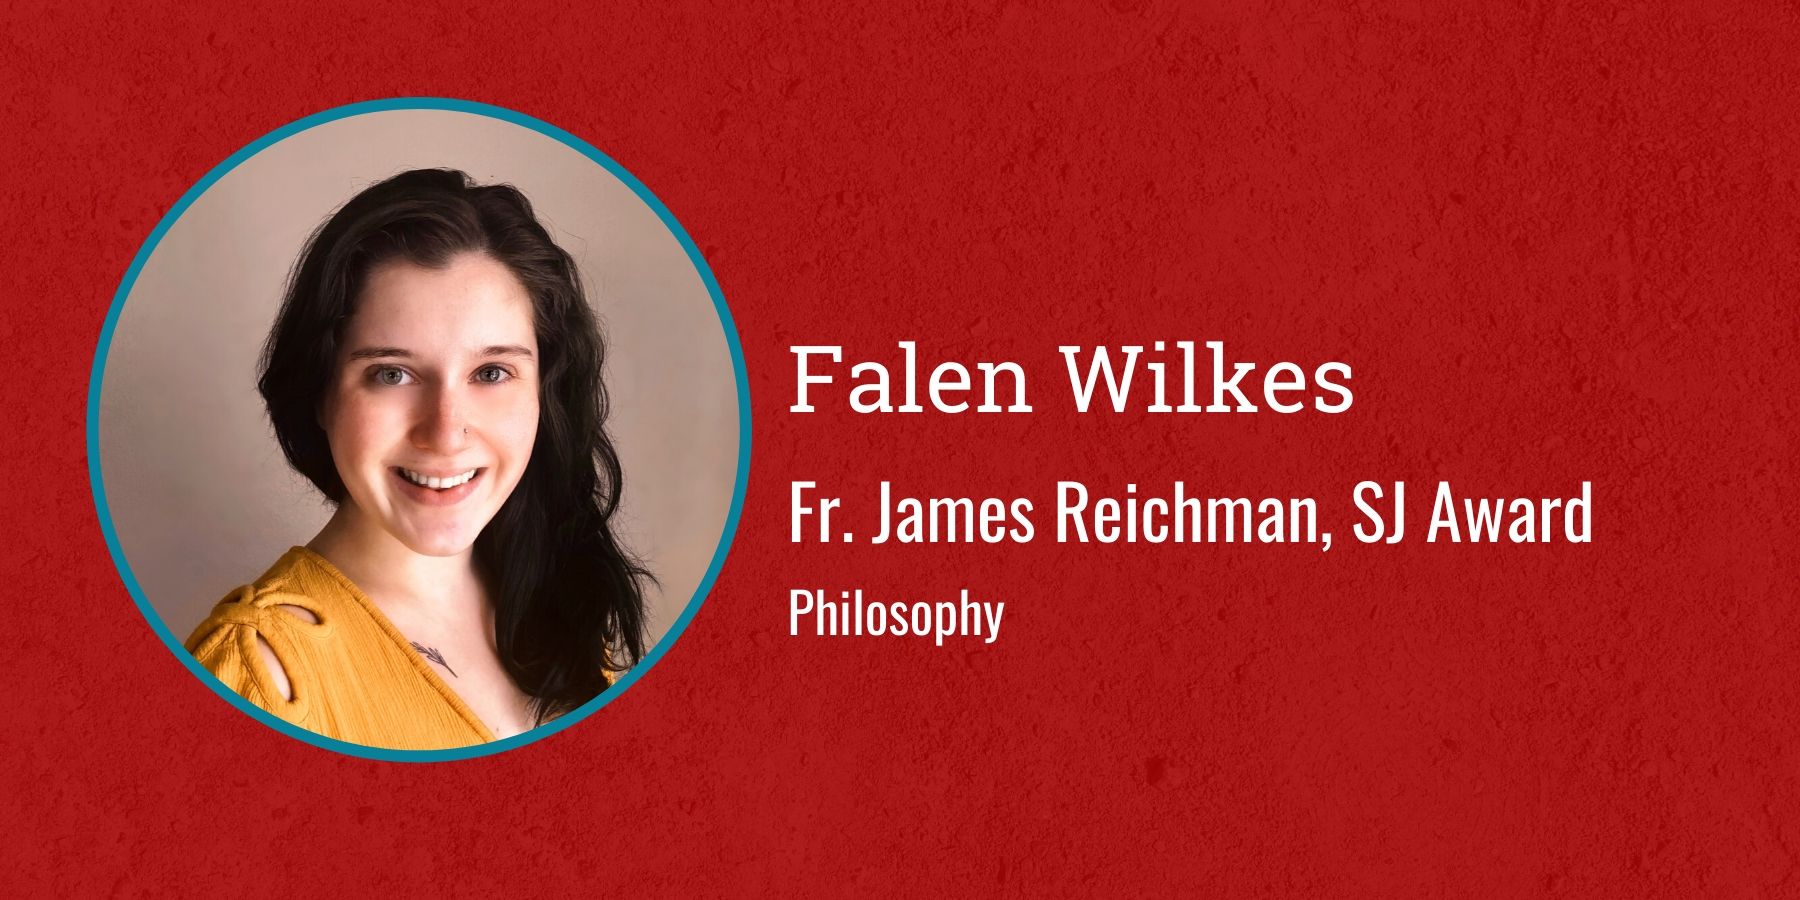 Photo of Falen Wilkes and text Fr. James Reichman, SJ Award, Philosophy